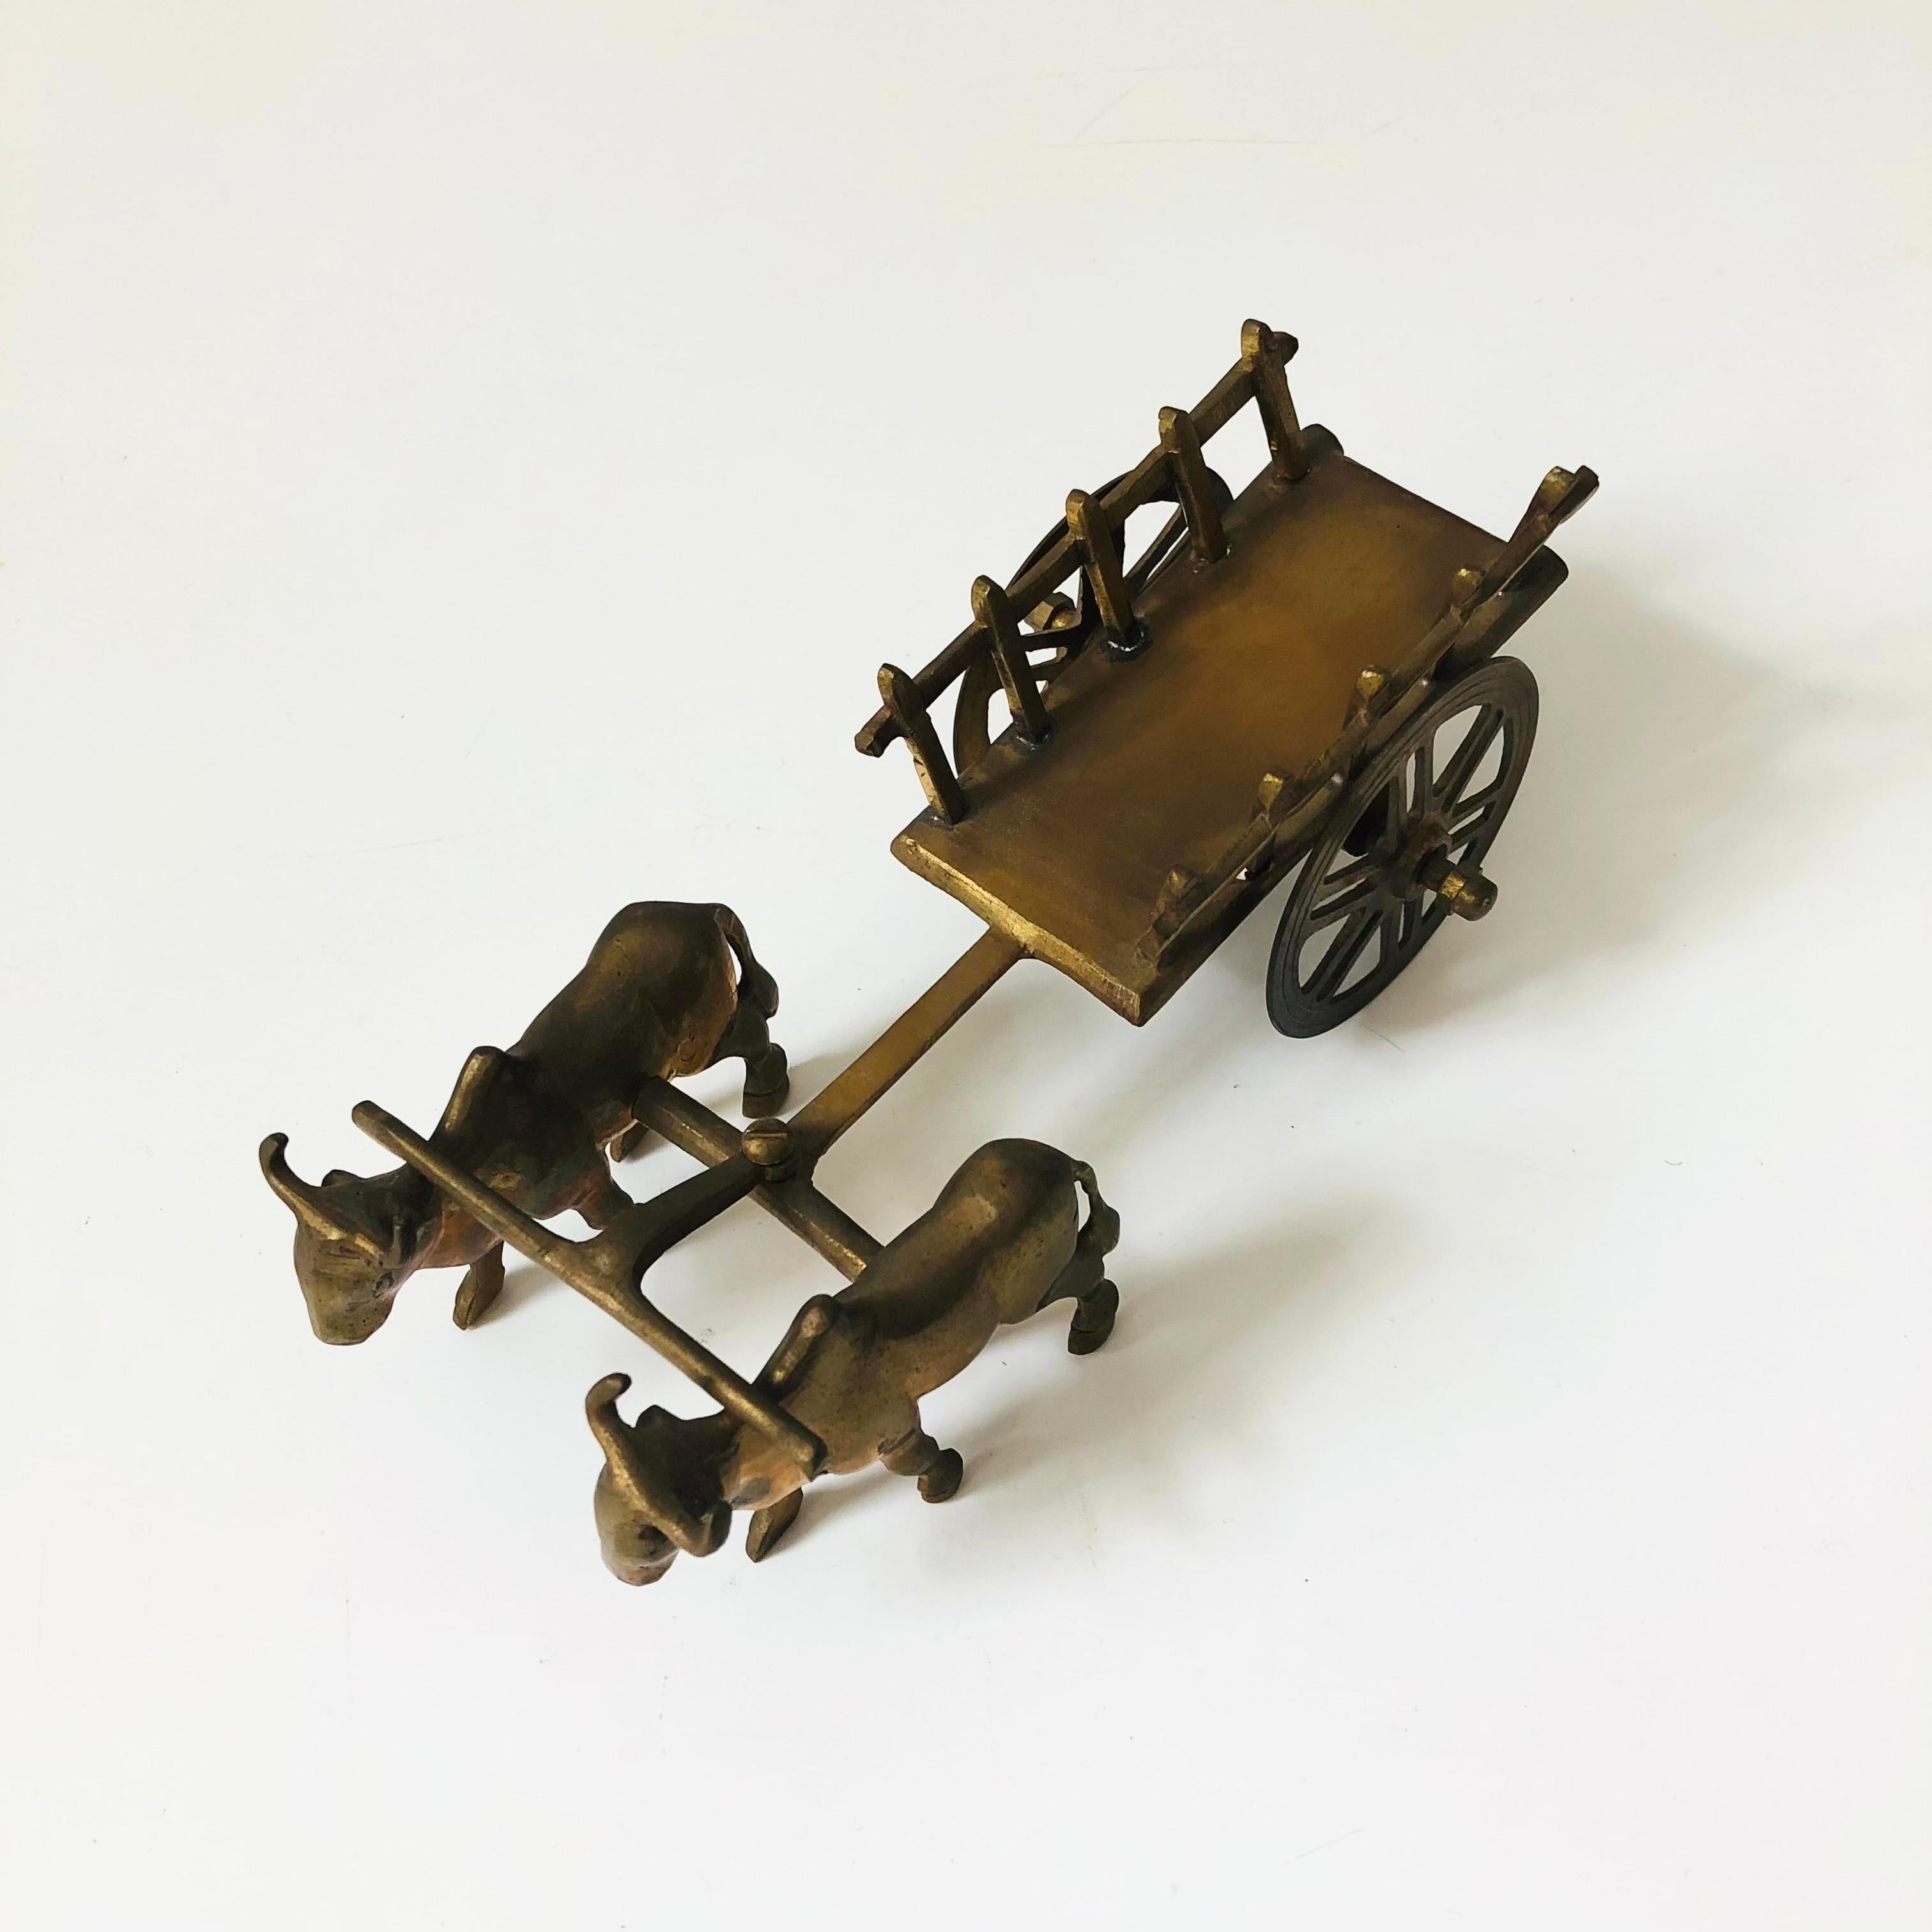 A pair of vintage brass oxen pulling a cart.

